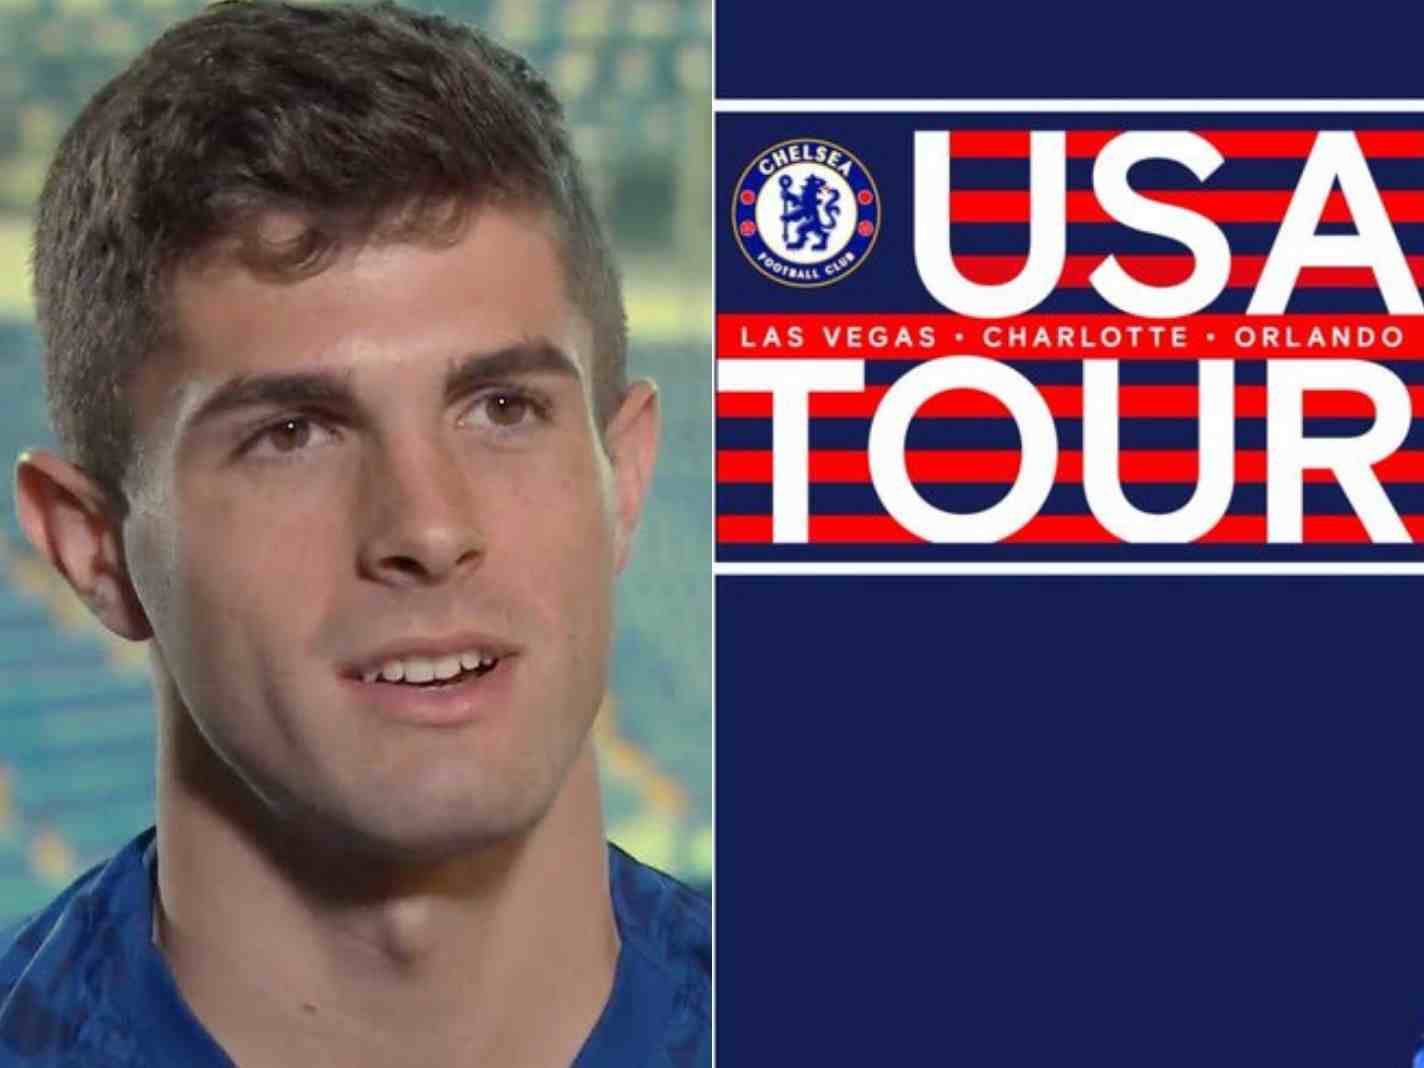 Christian Pulisic not promoted on Chelsea website ahead of US tour